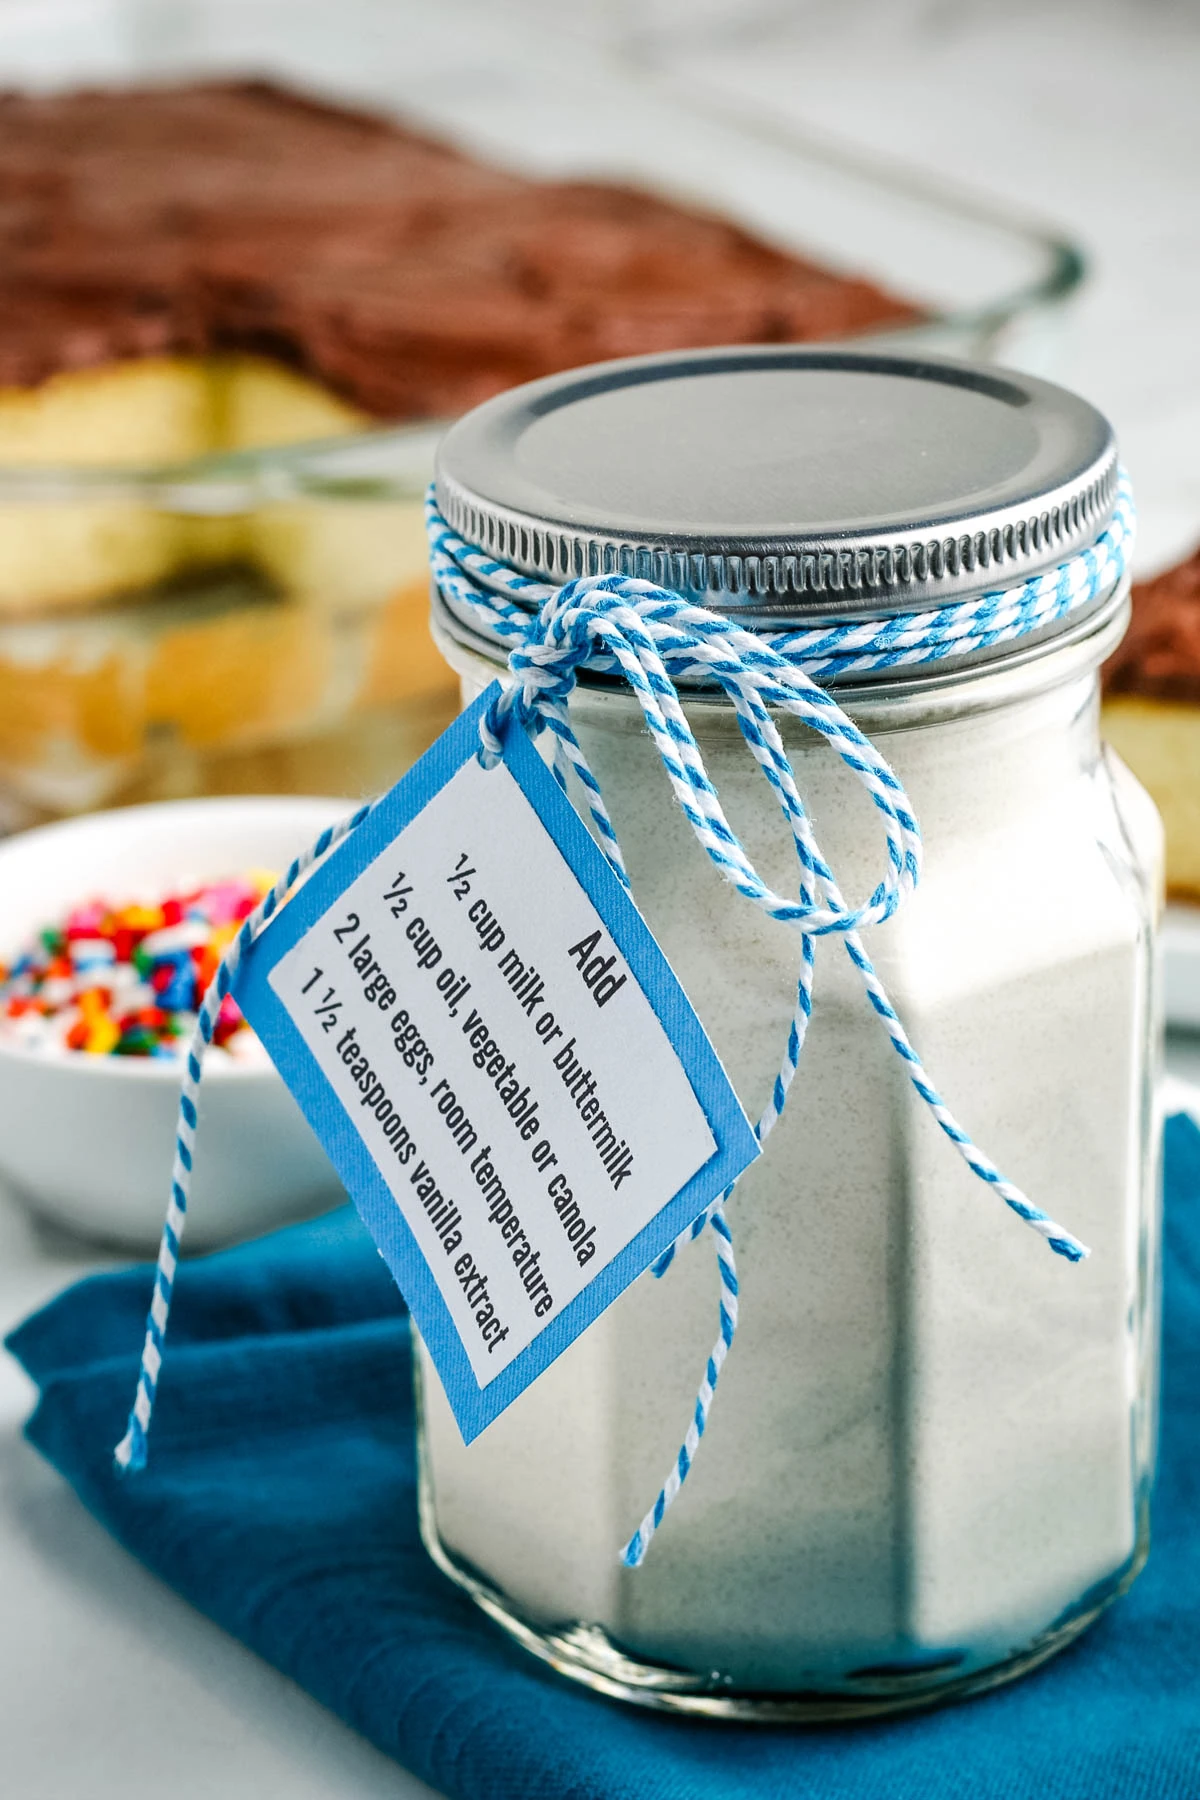 homemade cake mix in a small glass jar on a dark blue tea towel